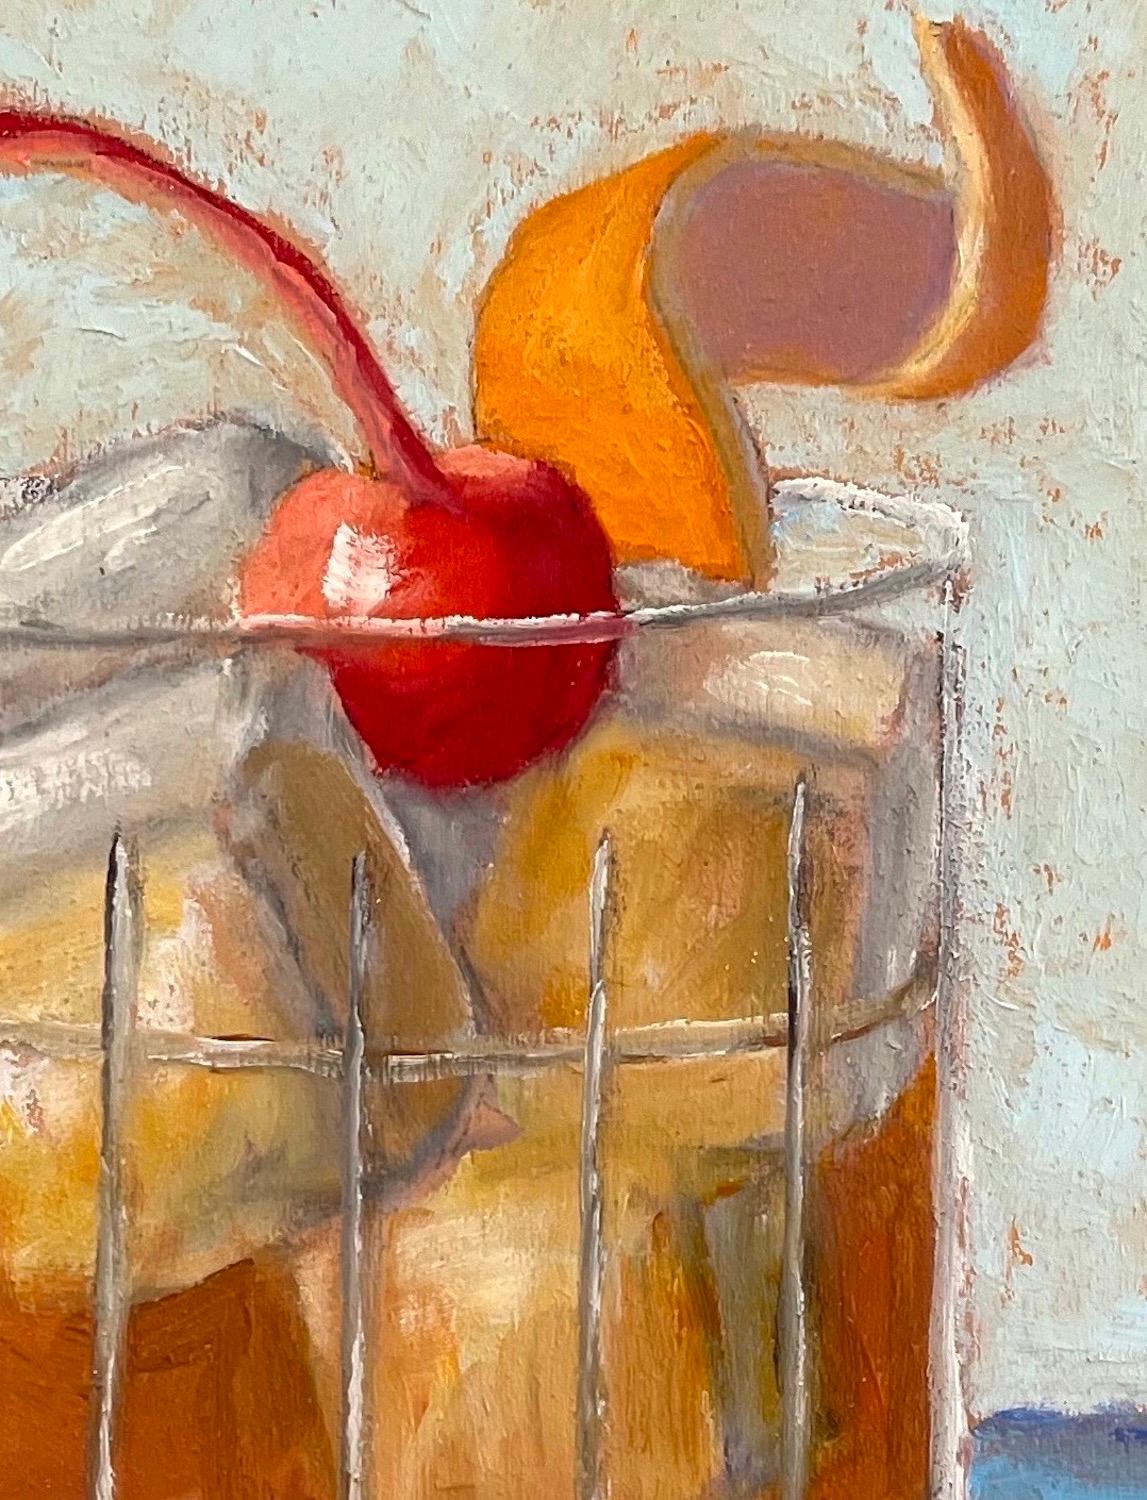 Cherry and a Twist, Oil Painting 2